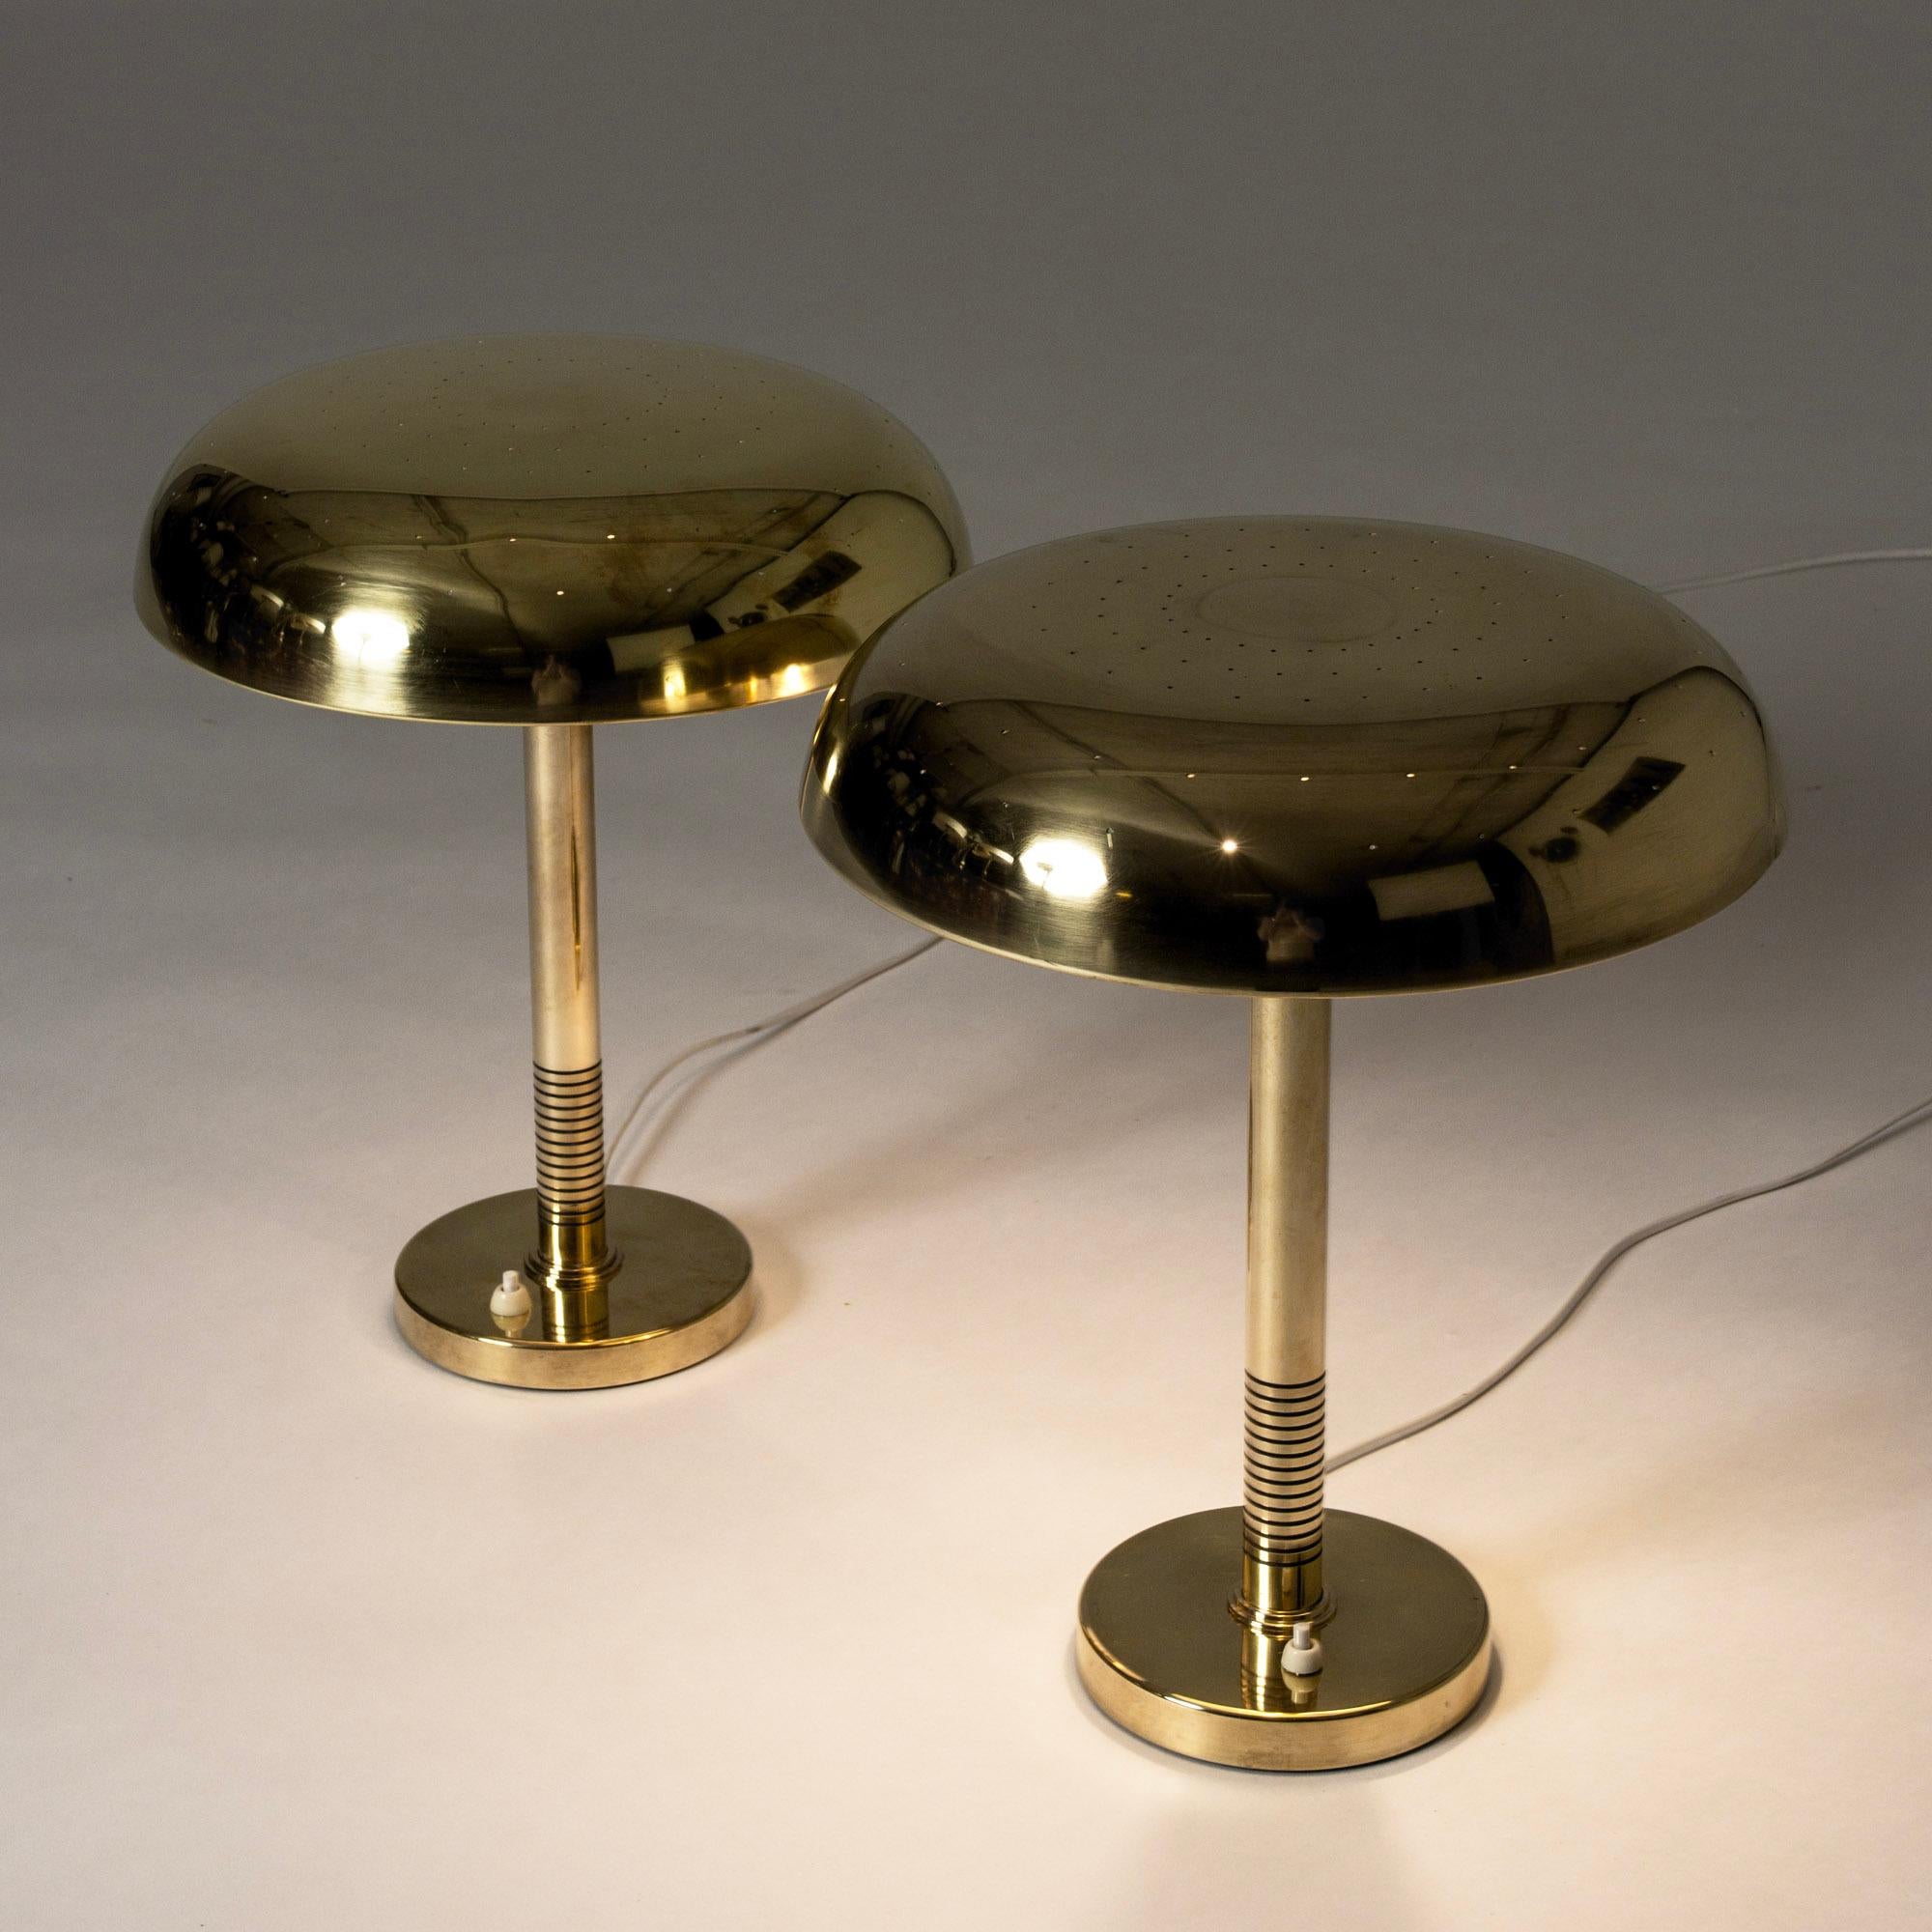 Swedish Midcentury Modern Brass Table Lamps, Boréns, Sweden, 1950s For Sale